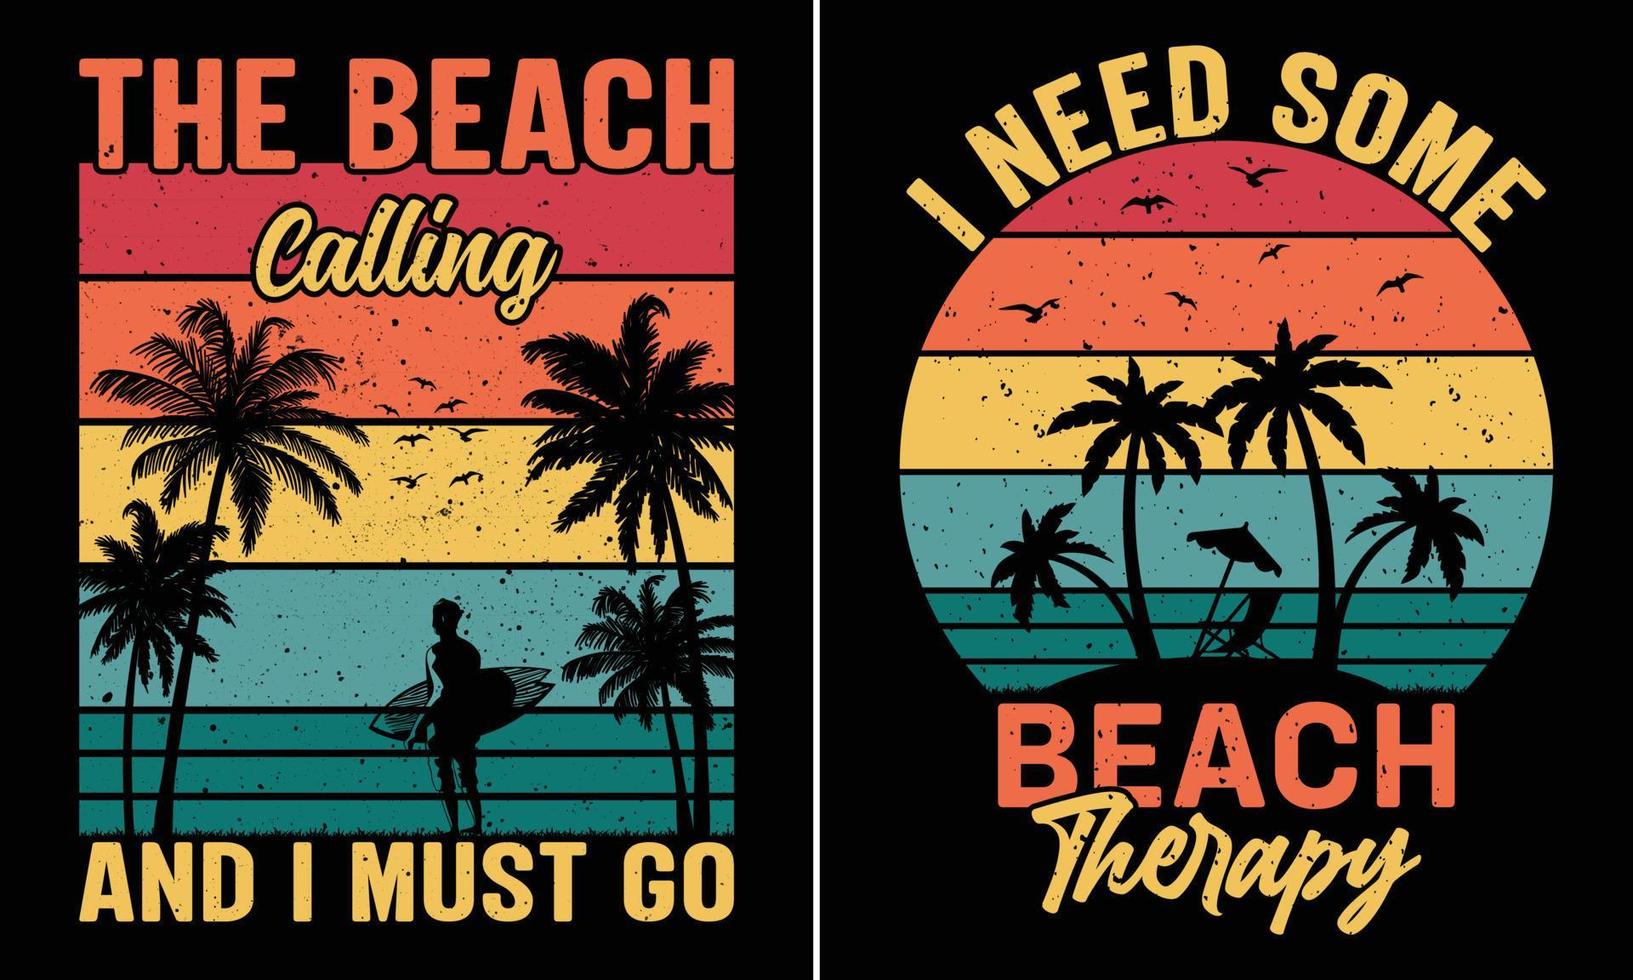 I Need Some Beach Therapy T-shirt Design, The Beach Calling And I Must Go T-shirt Design, Retro Vintage Sunset Summer Beach T-shirt Design vector